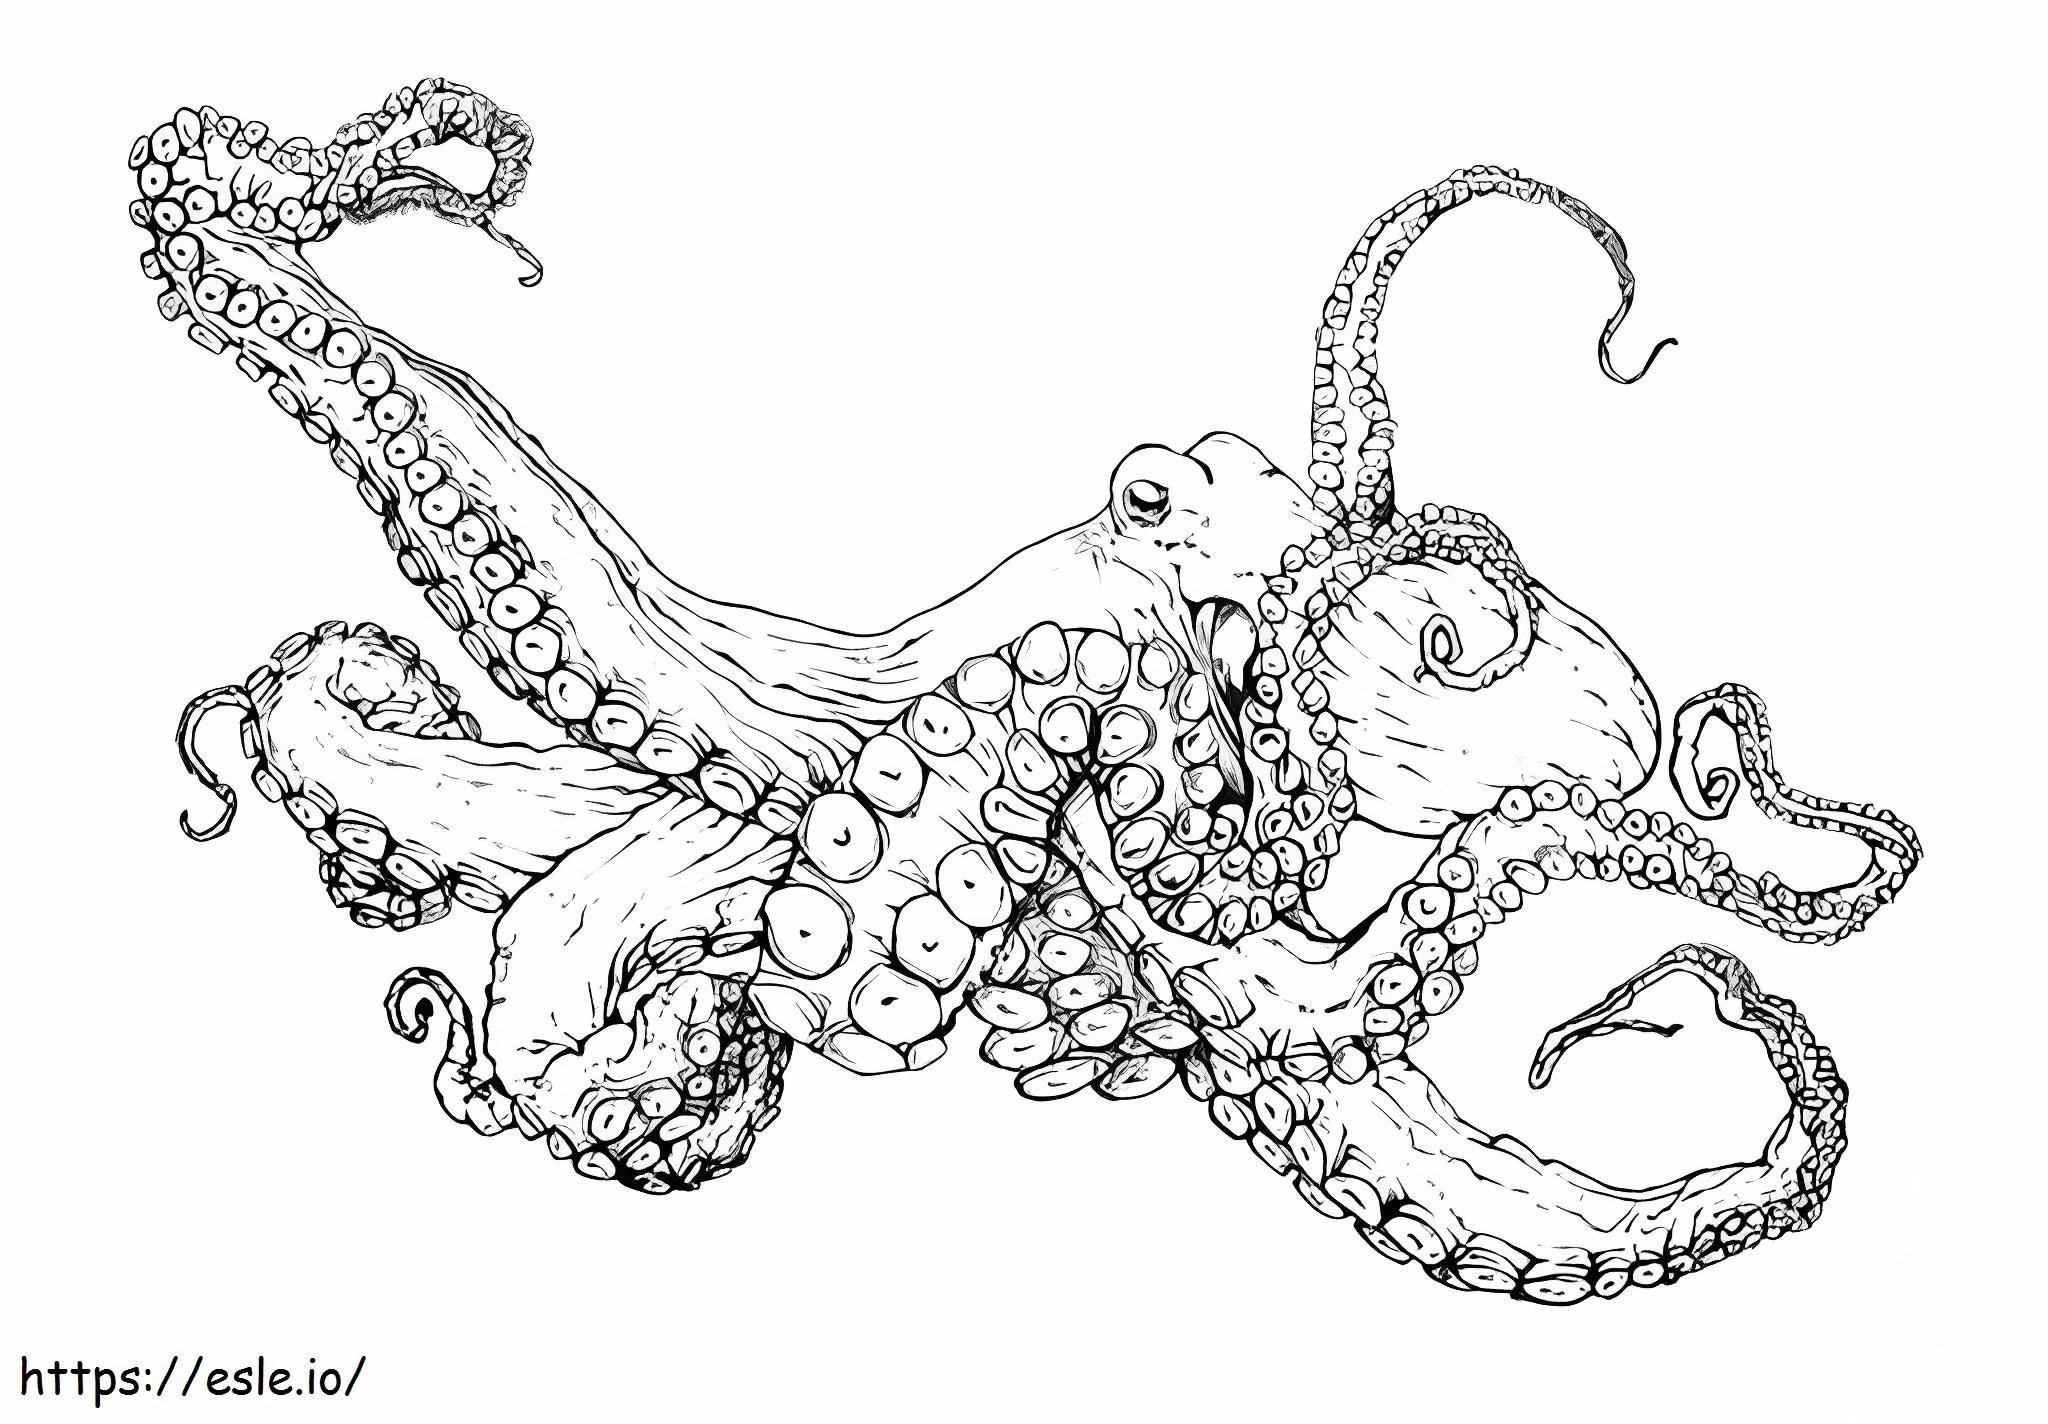 Common Octopus Animal coloring page